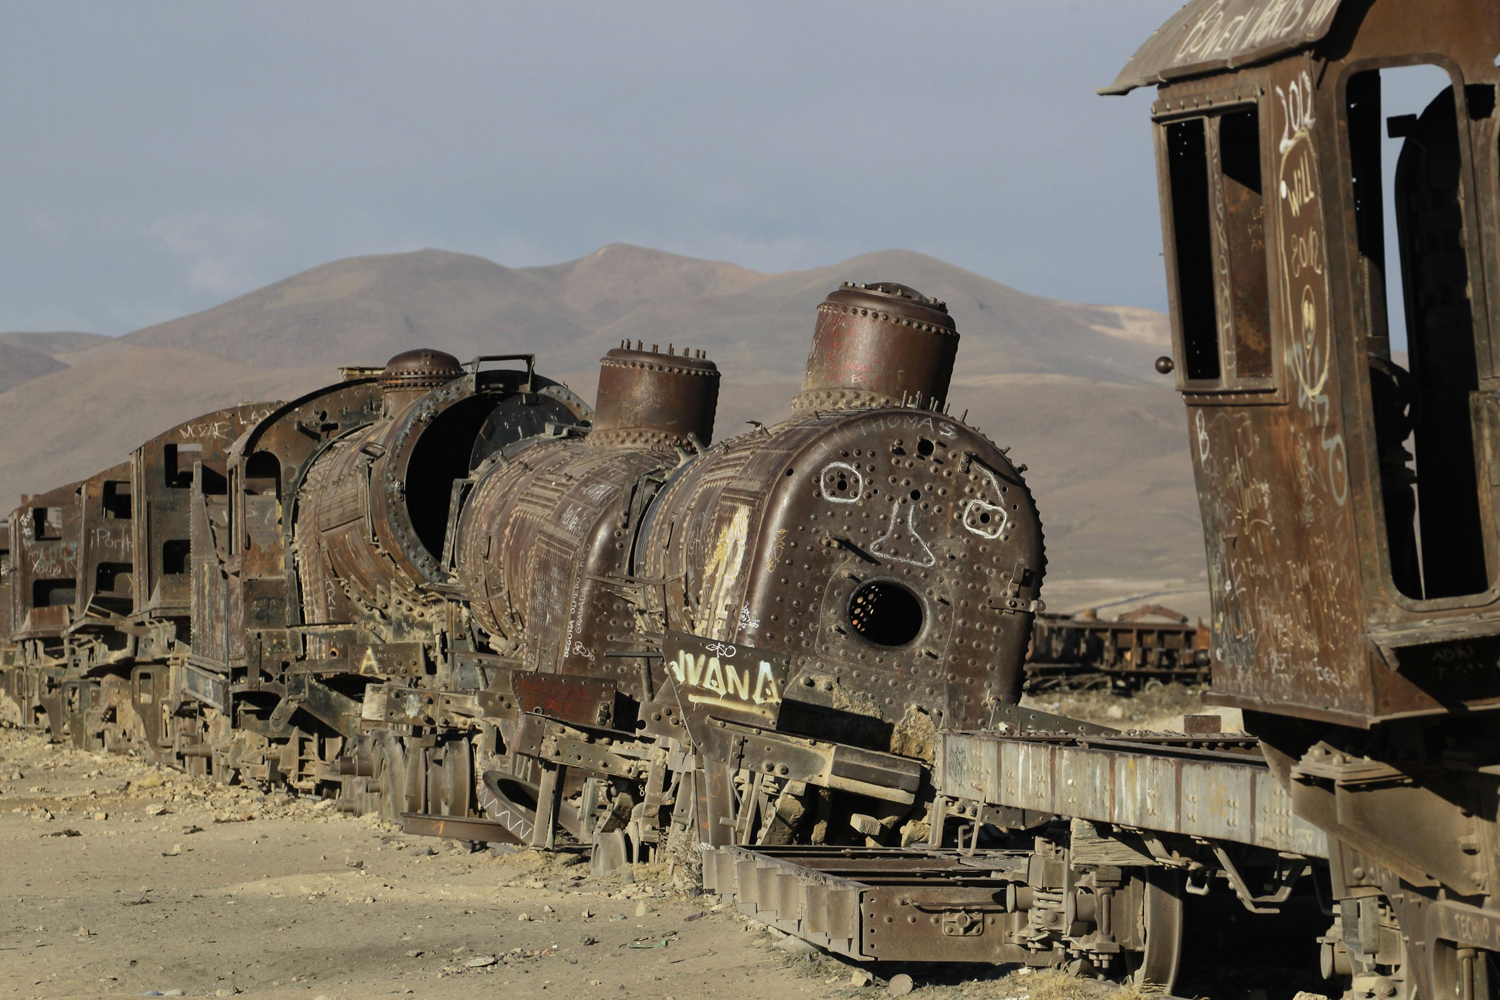 Image: Nov. 5, 2012. Old locomotives are seen in a train cemetery in Uyuni, near a salt flat some 290 miles (466 km) south of La Paz, Bolivia.